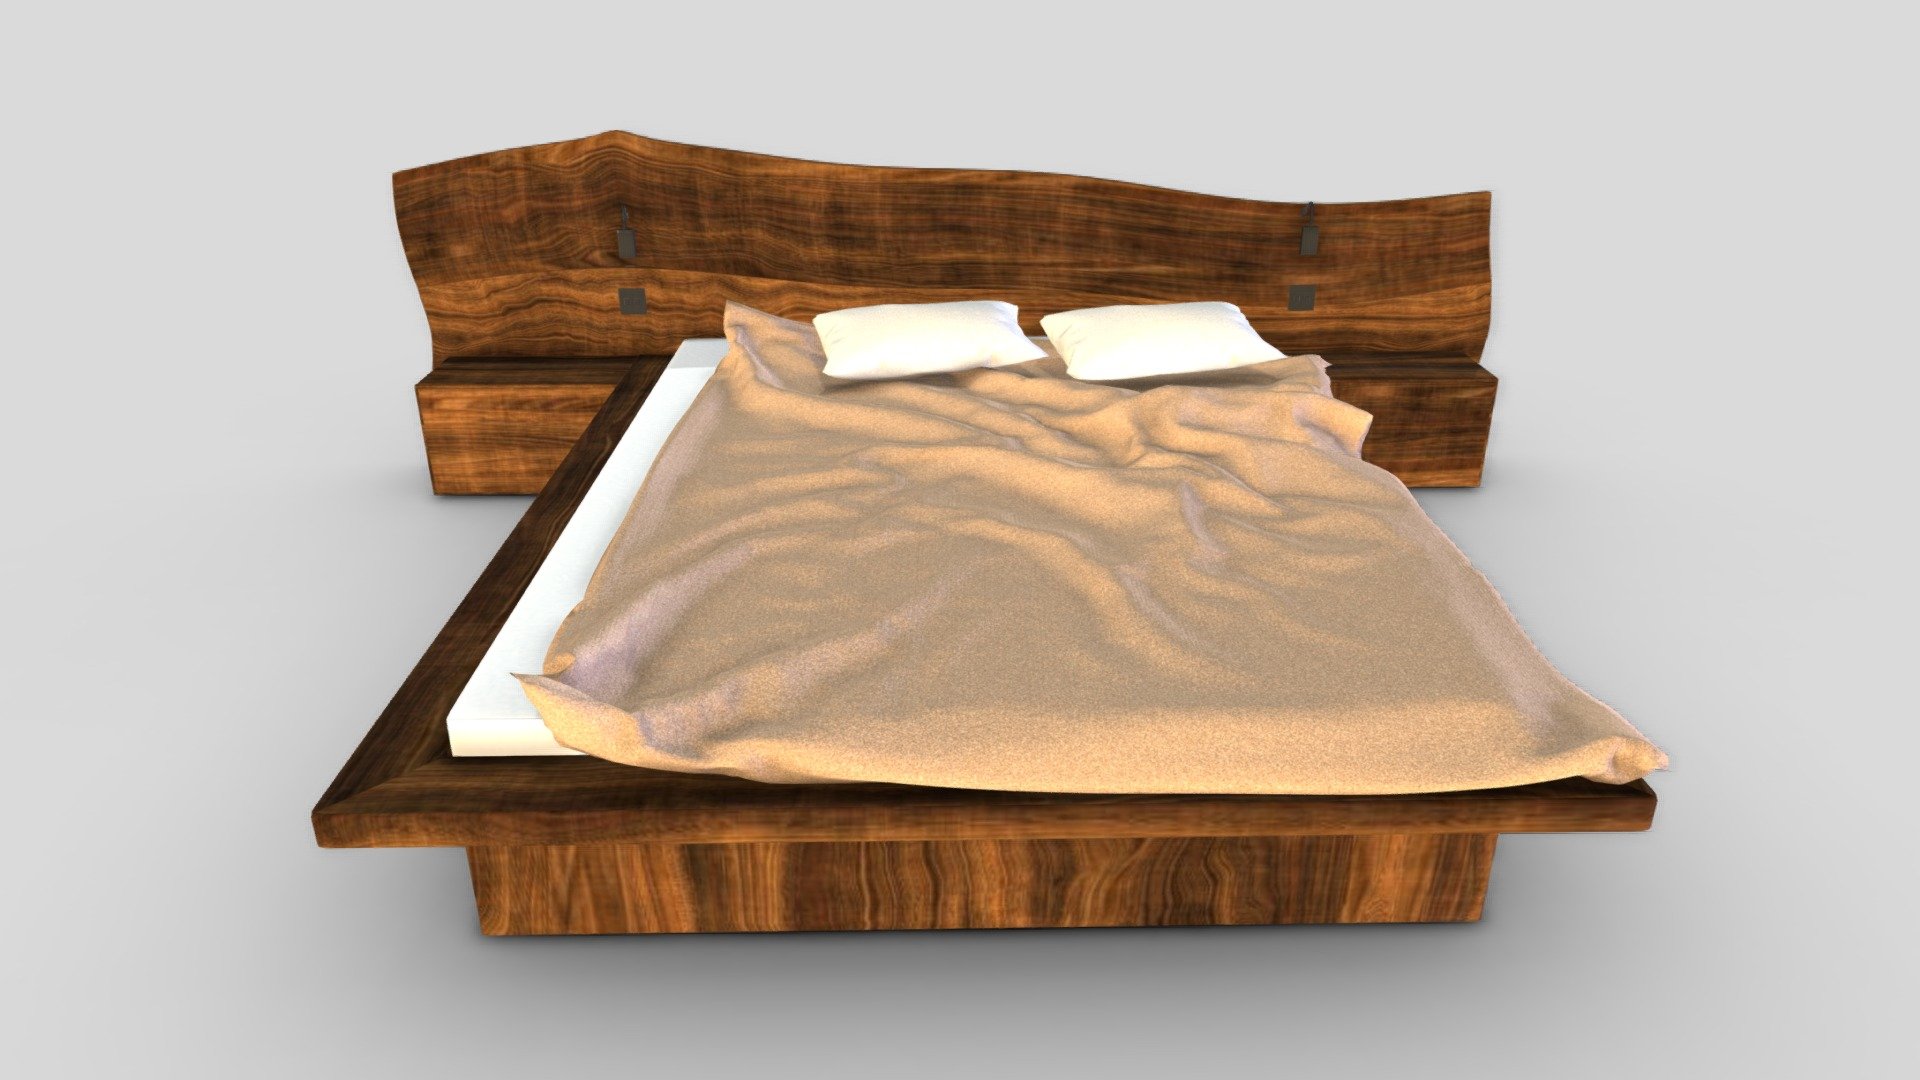 High-quality model of Wooden Hard Massive Bed . Can be used in interior images. The model is well-modelled, high-detailed and customizable. The model consists of:

Wooden base; -Two Bra; -Soft Mattress; -One Blanket; -Two pillows. The model can be used for decorating interior, bedroom 3d model